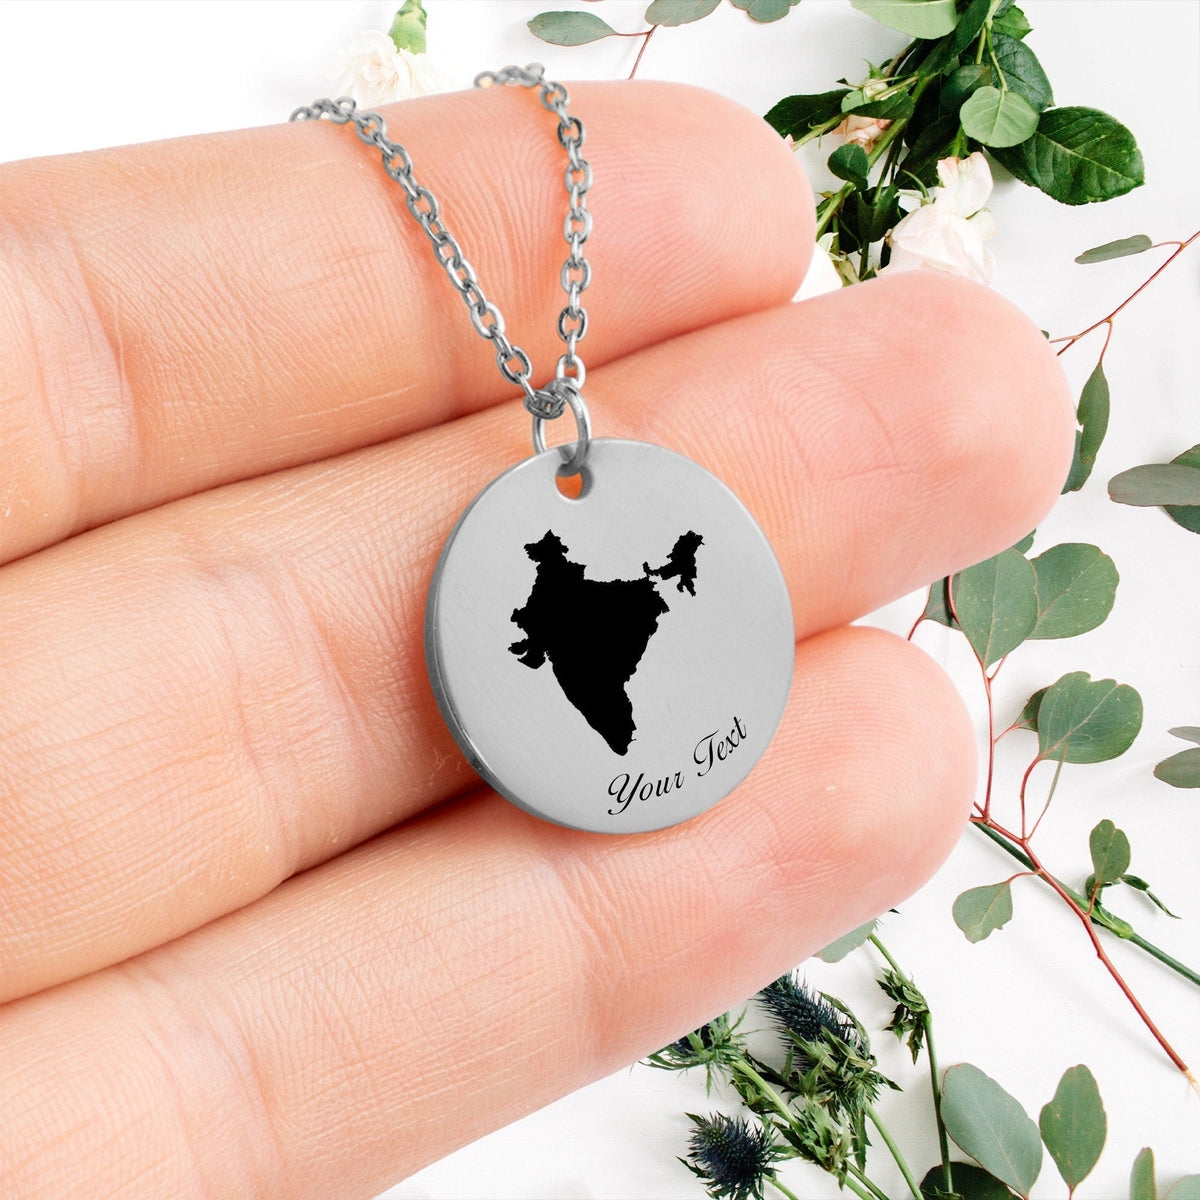 India Country Map Necklace, Your Name Necklace, Minimalist Necklace, Personalized Gift, Silver Necklace, Gift For Him Her